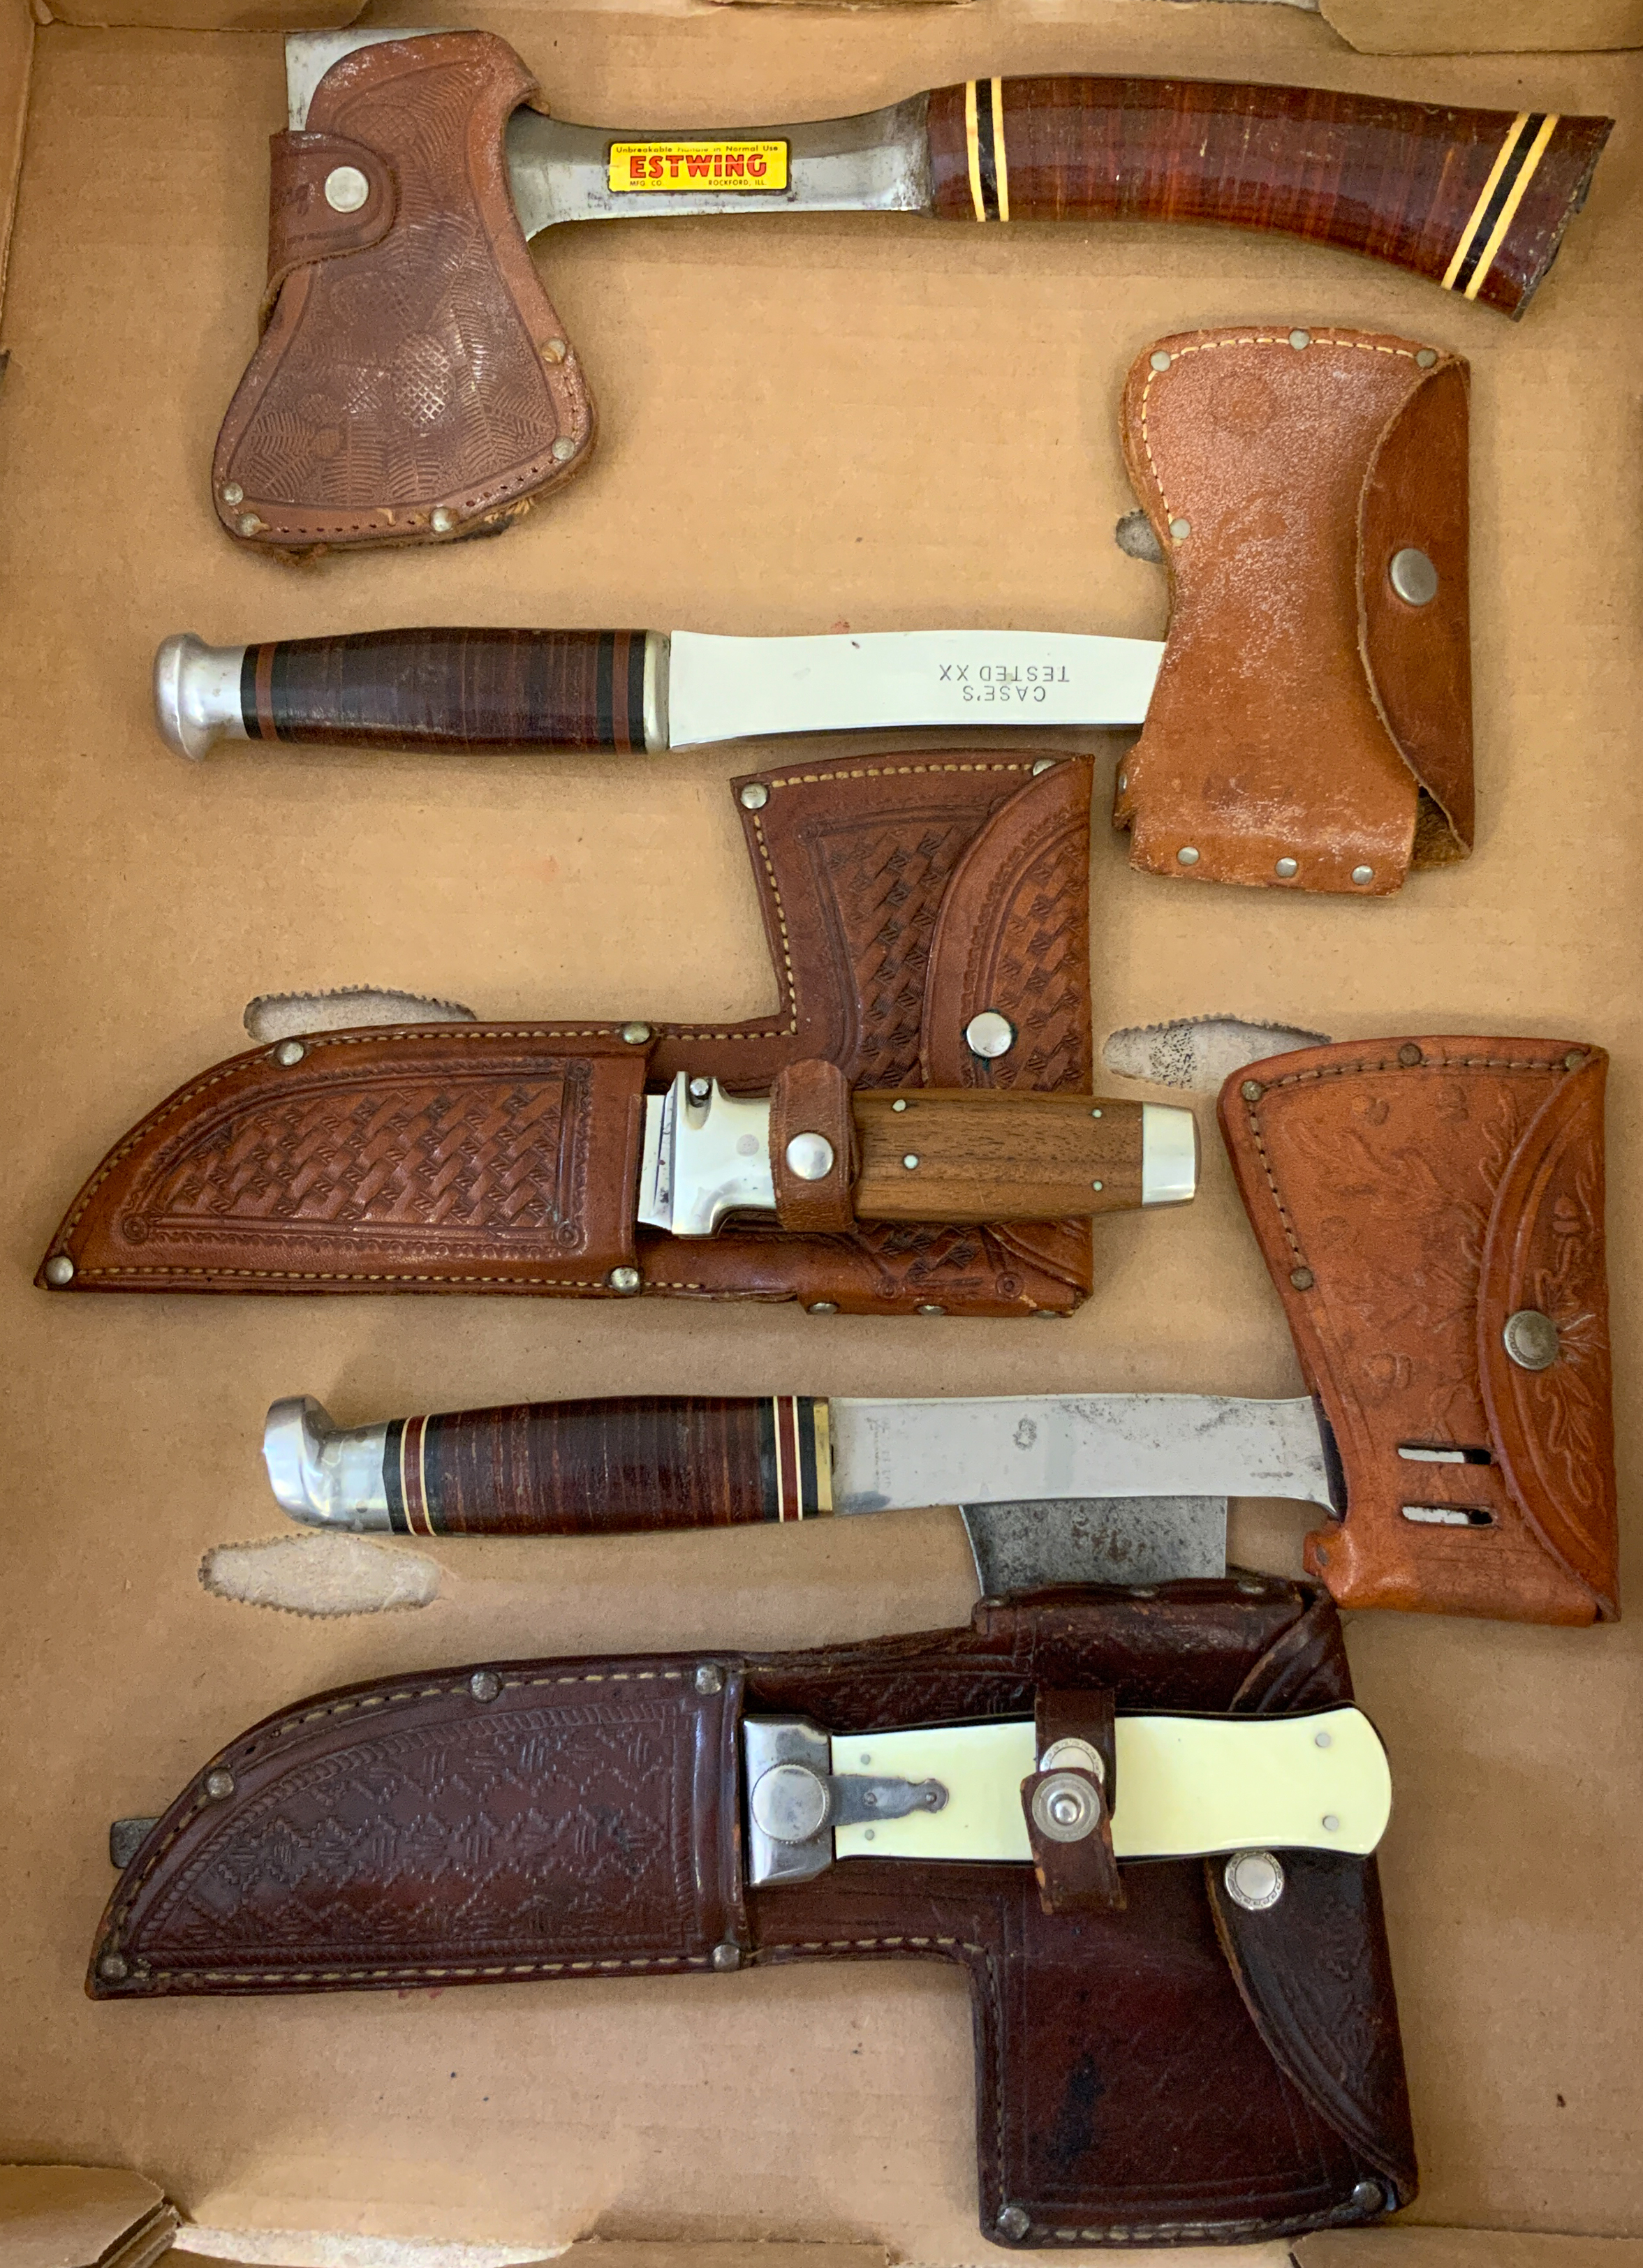 HATCHETS, KNIFE SETS AND MILITARY